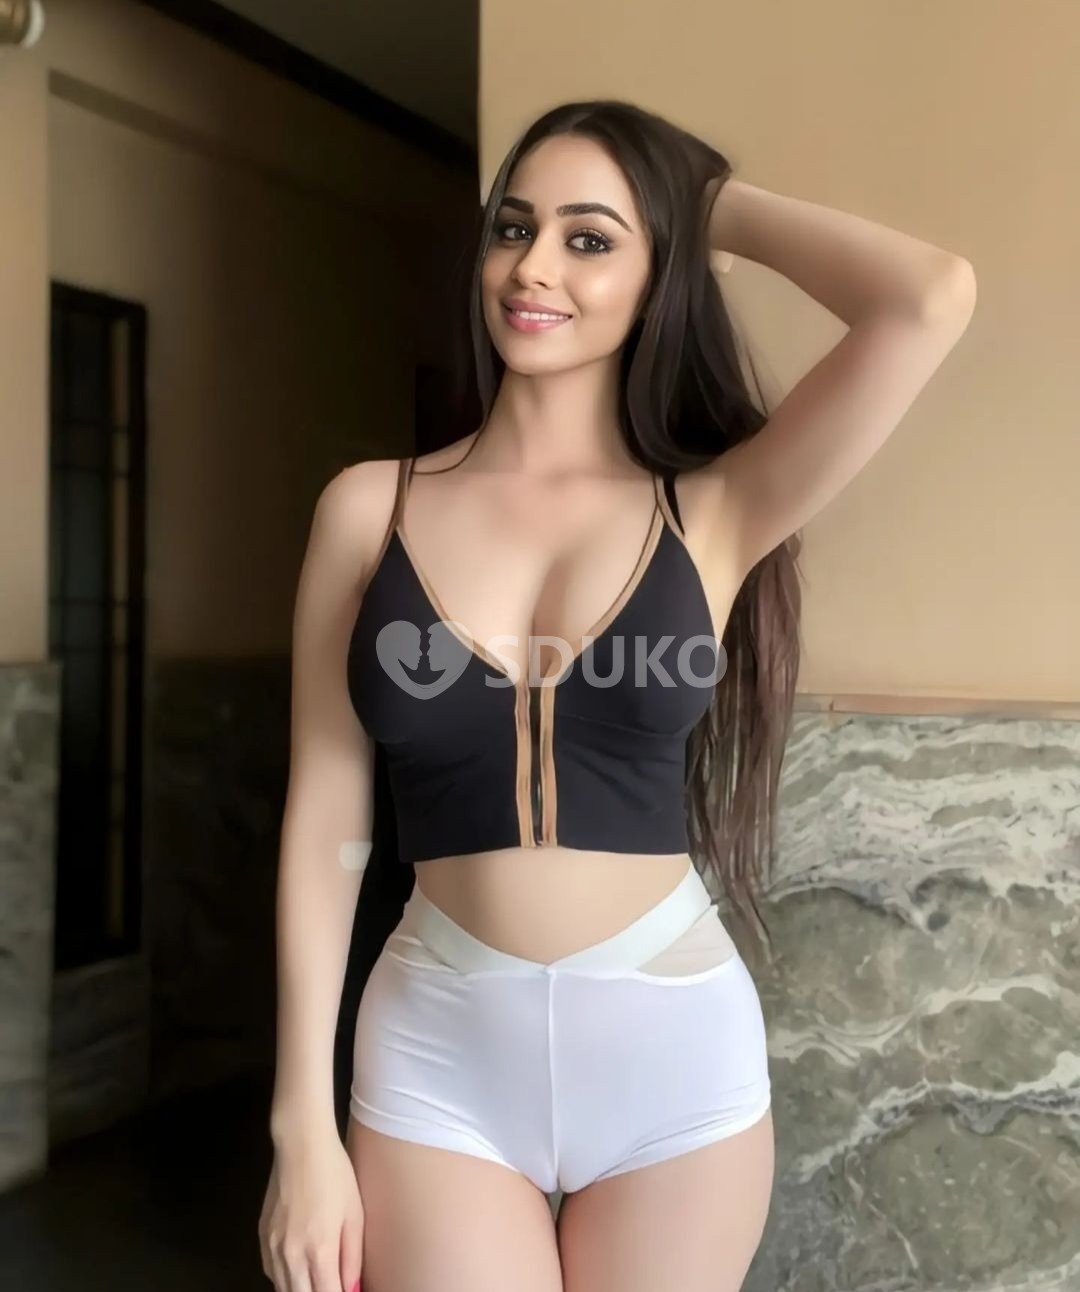 6000 UNLIMITED CALL GIRLS IN Dwarka INDEPENDENT GIRLS ESCORT SERVICE OUTCALL INCALL AVAILABLE.Real model